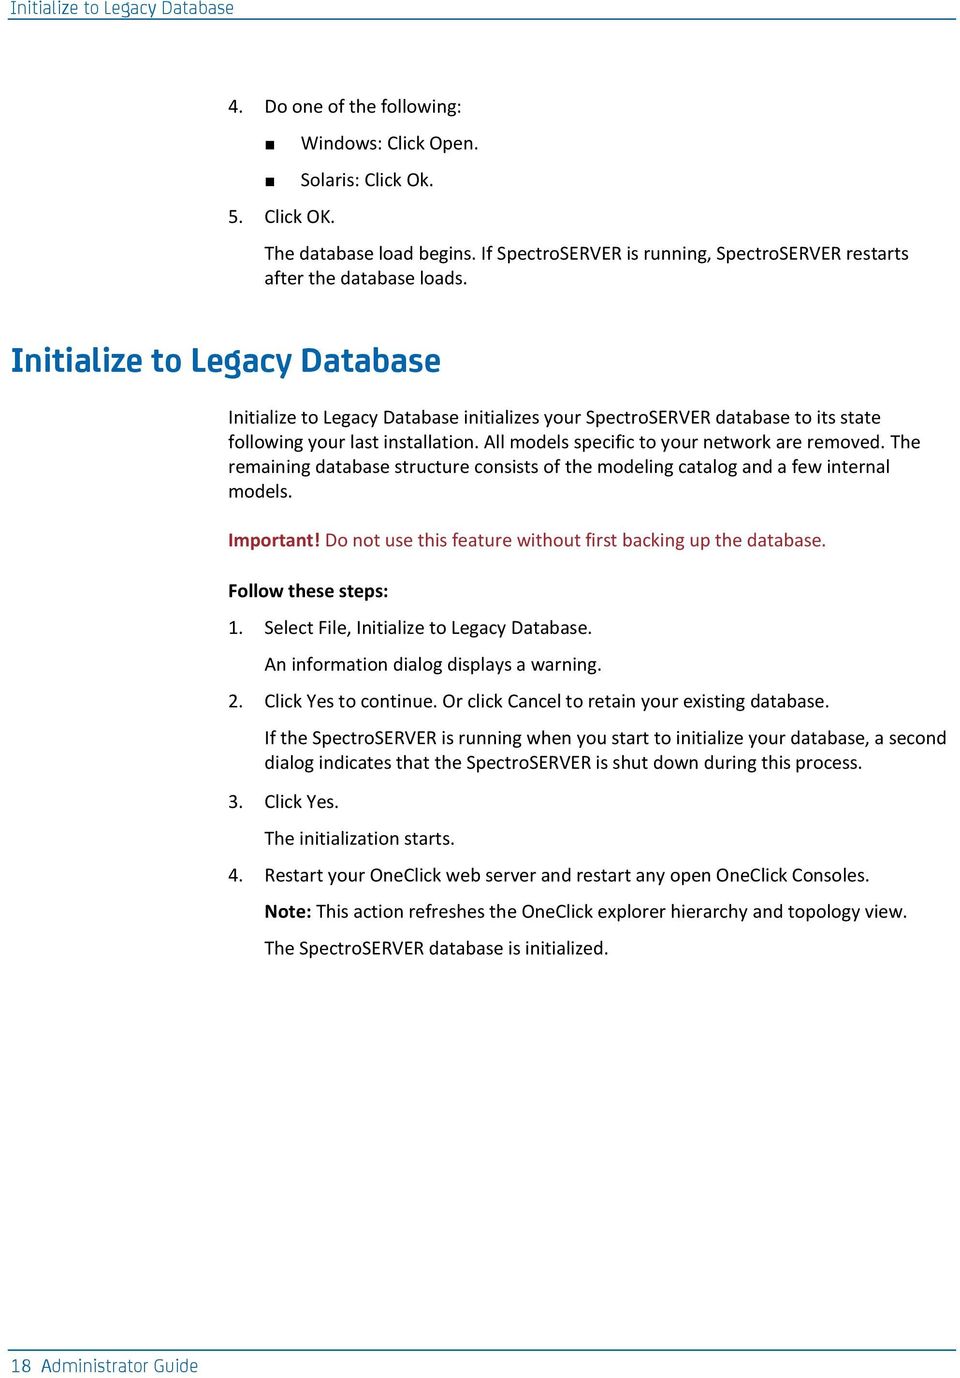 Initialize to Legacy Database Initialize to Legacy Database initializes your SpectroSERVER database to its state following your last installation. All models specific to your network are removed.